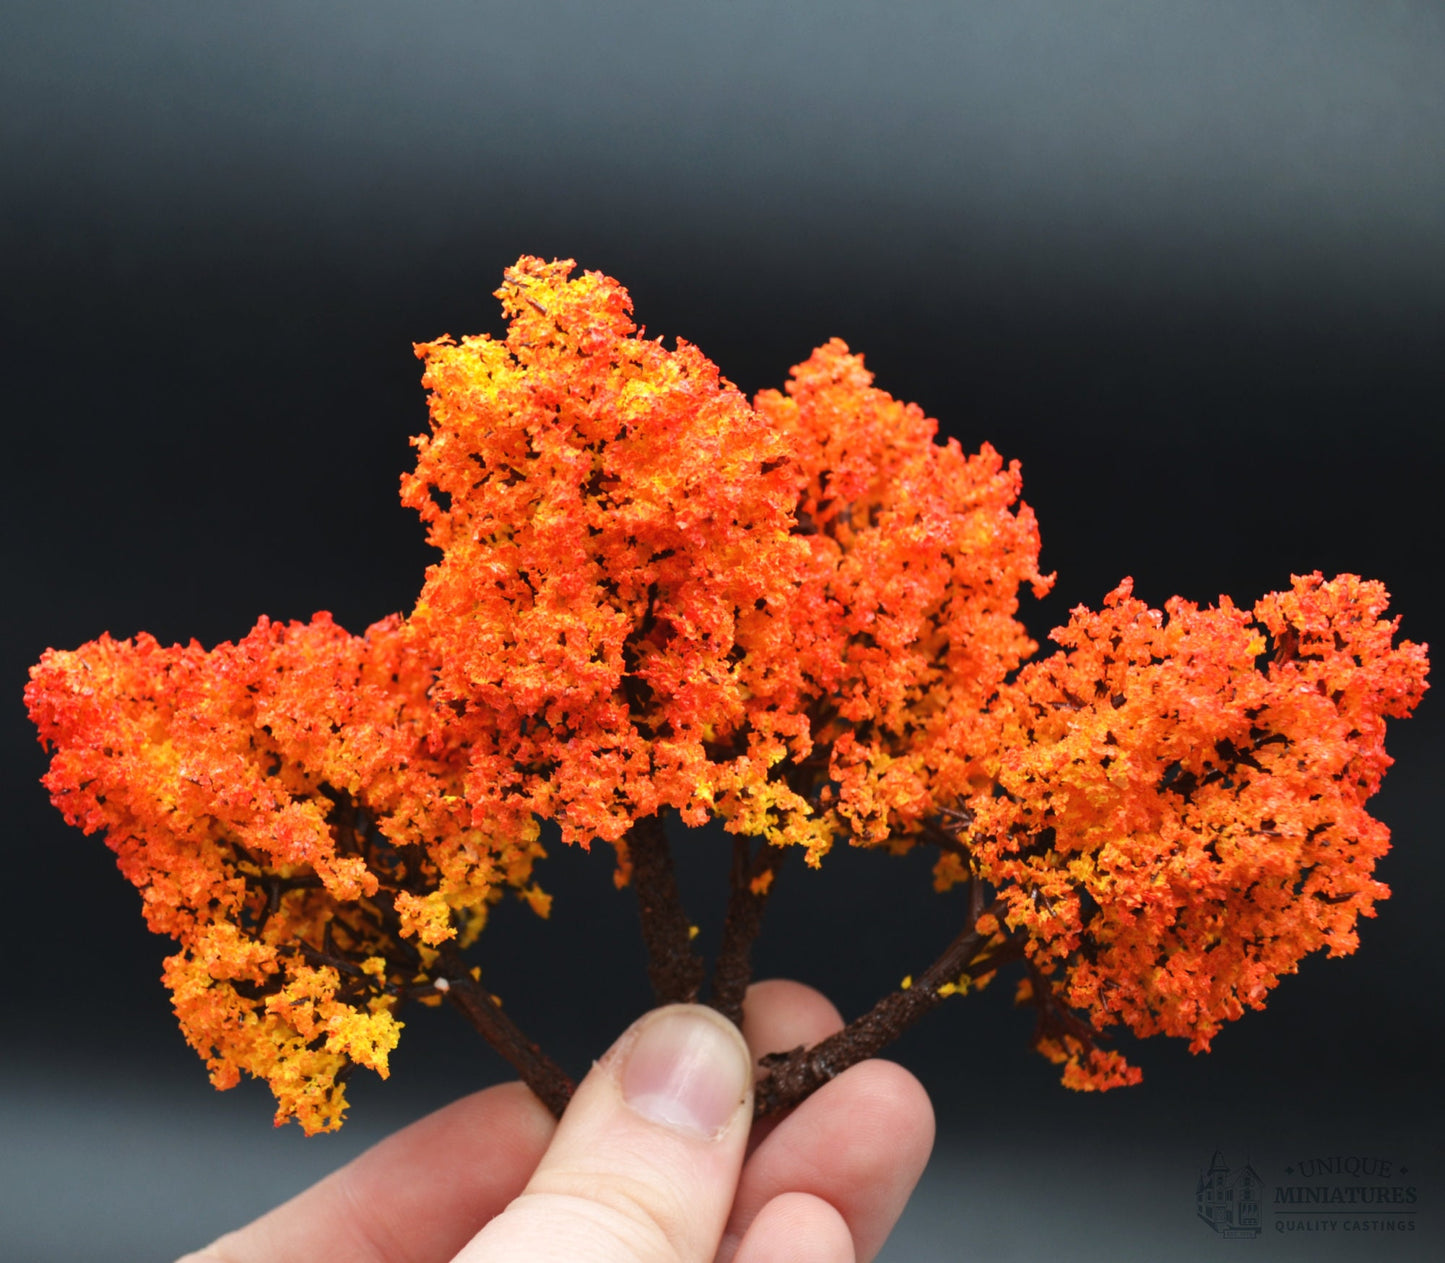 3 Inch Red Orange Autumn Tree with Textured Trunk | 3 Inches | Set of Four | Miniature for Dollhouse Garden